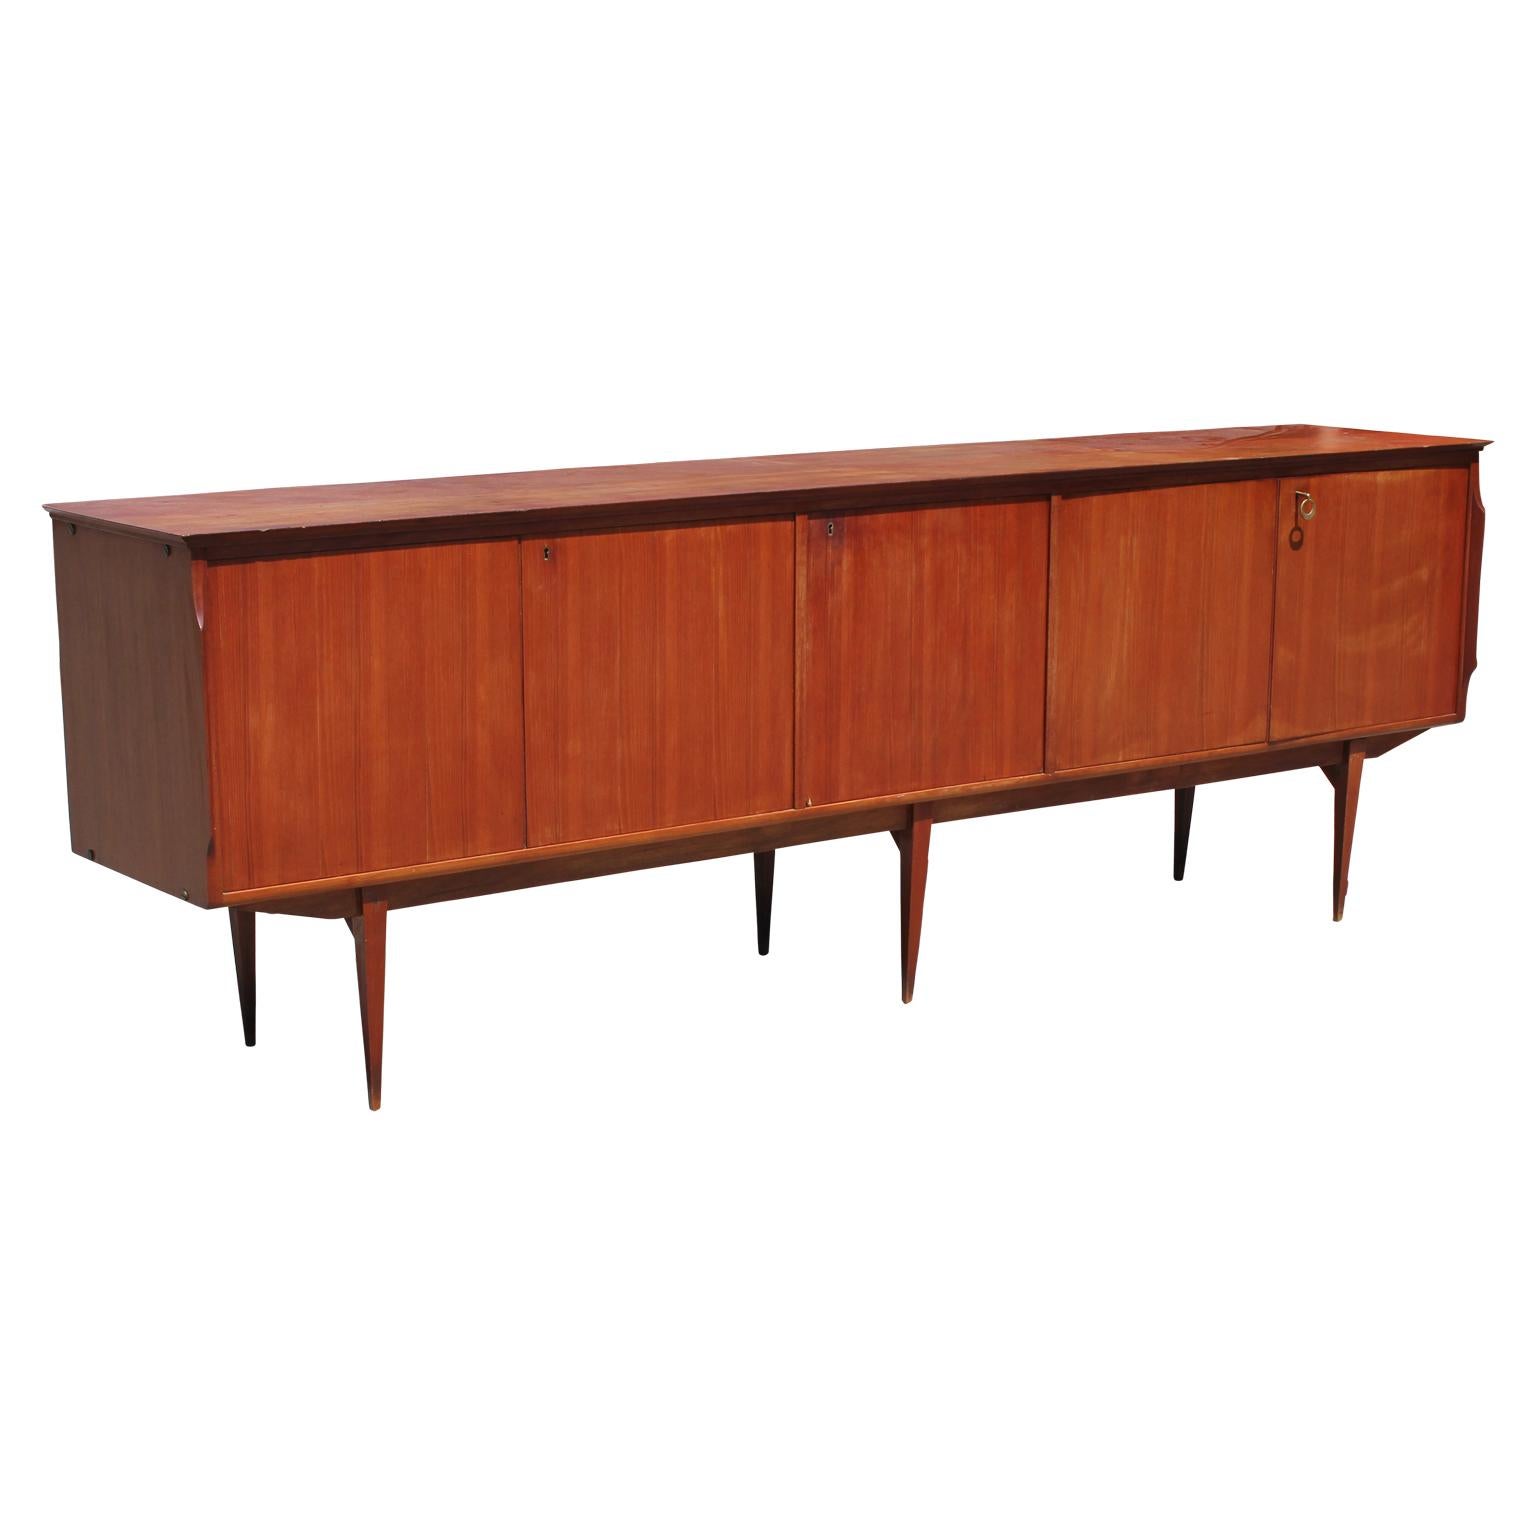 Mid-Century Modern Midcentury Sideboard / Credenza with Hidden Drawers in Style of Kofod Larsen